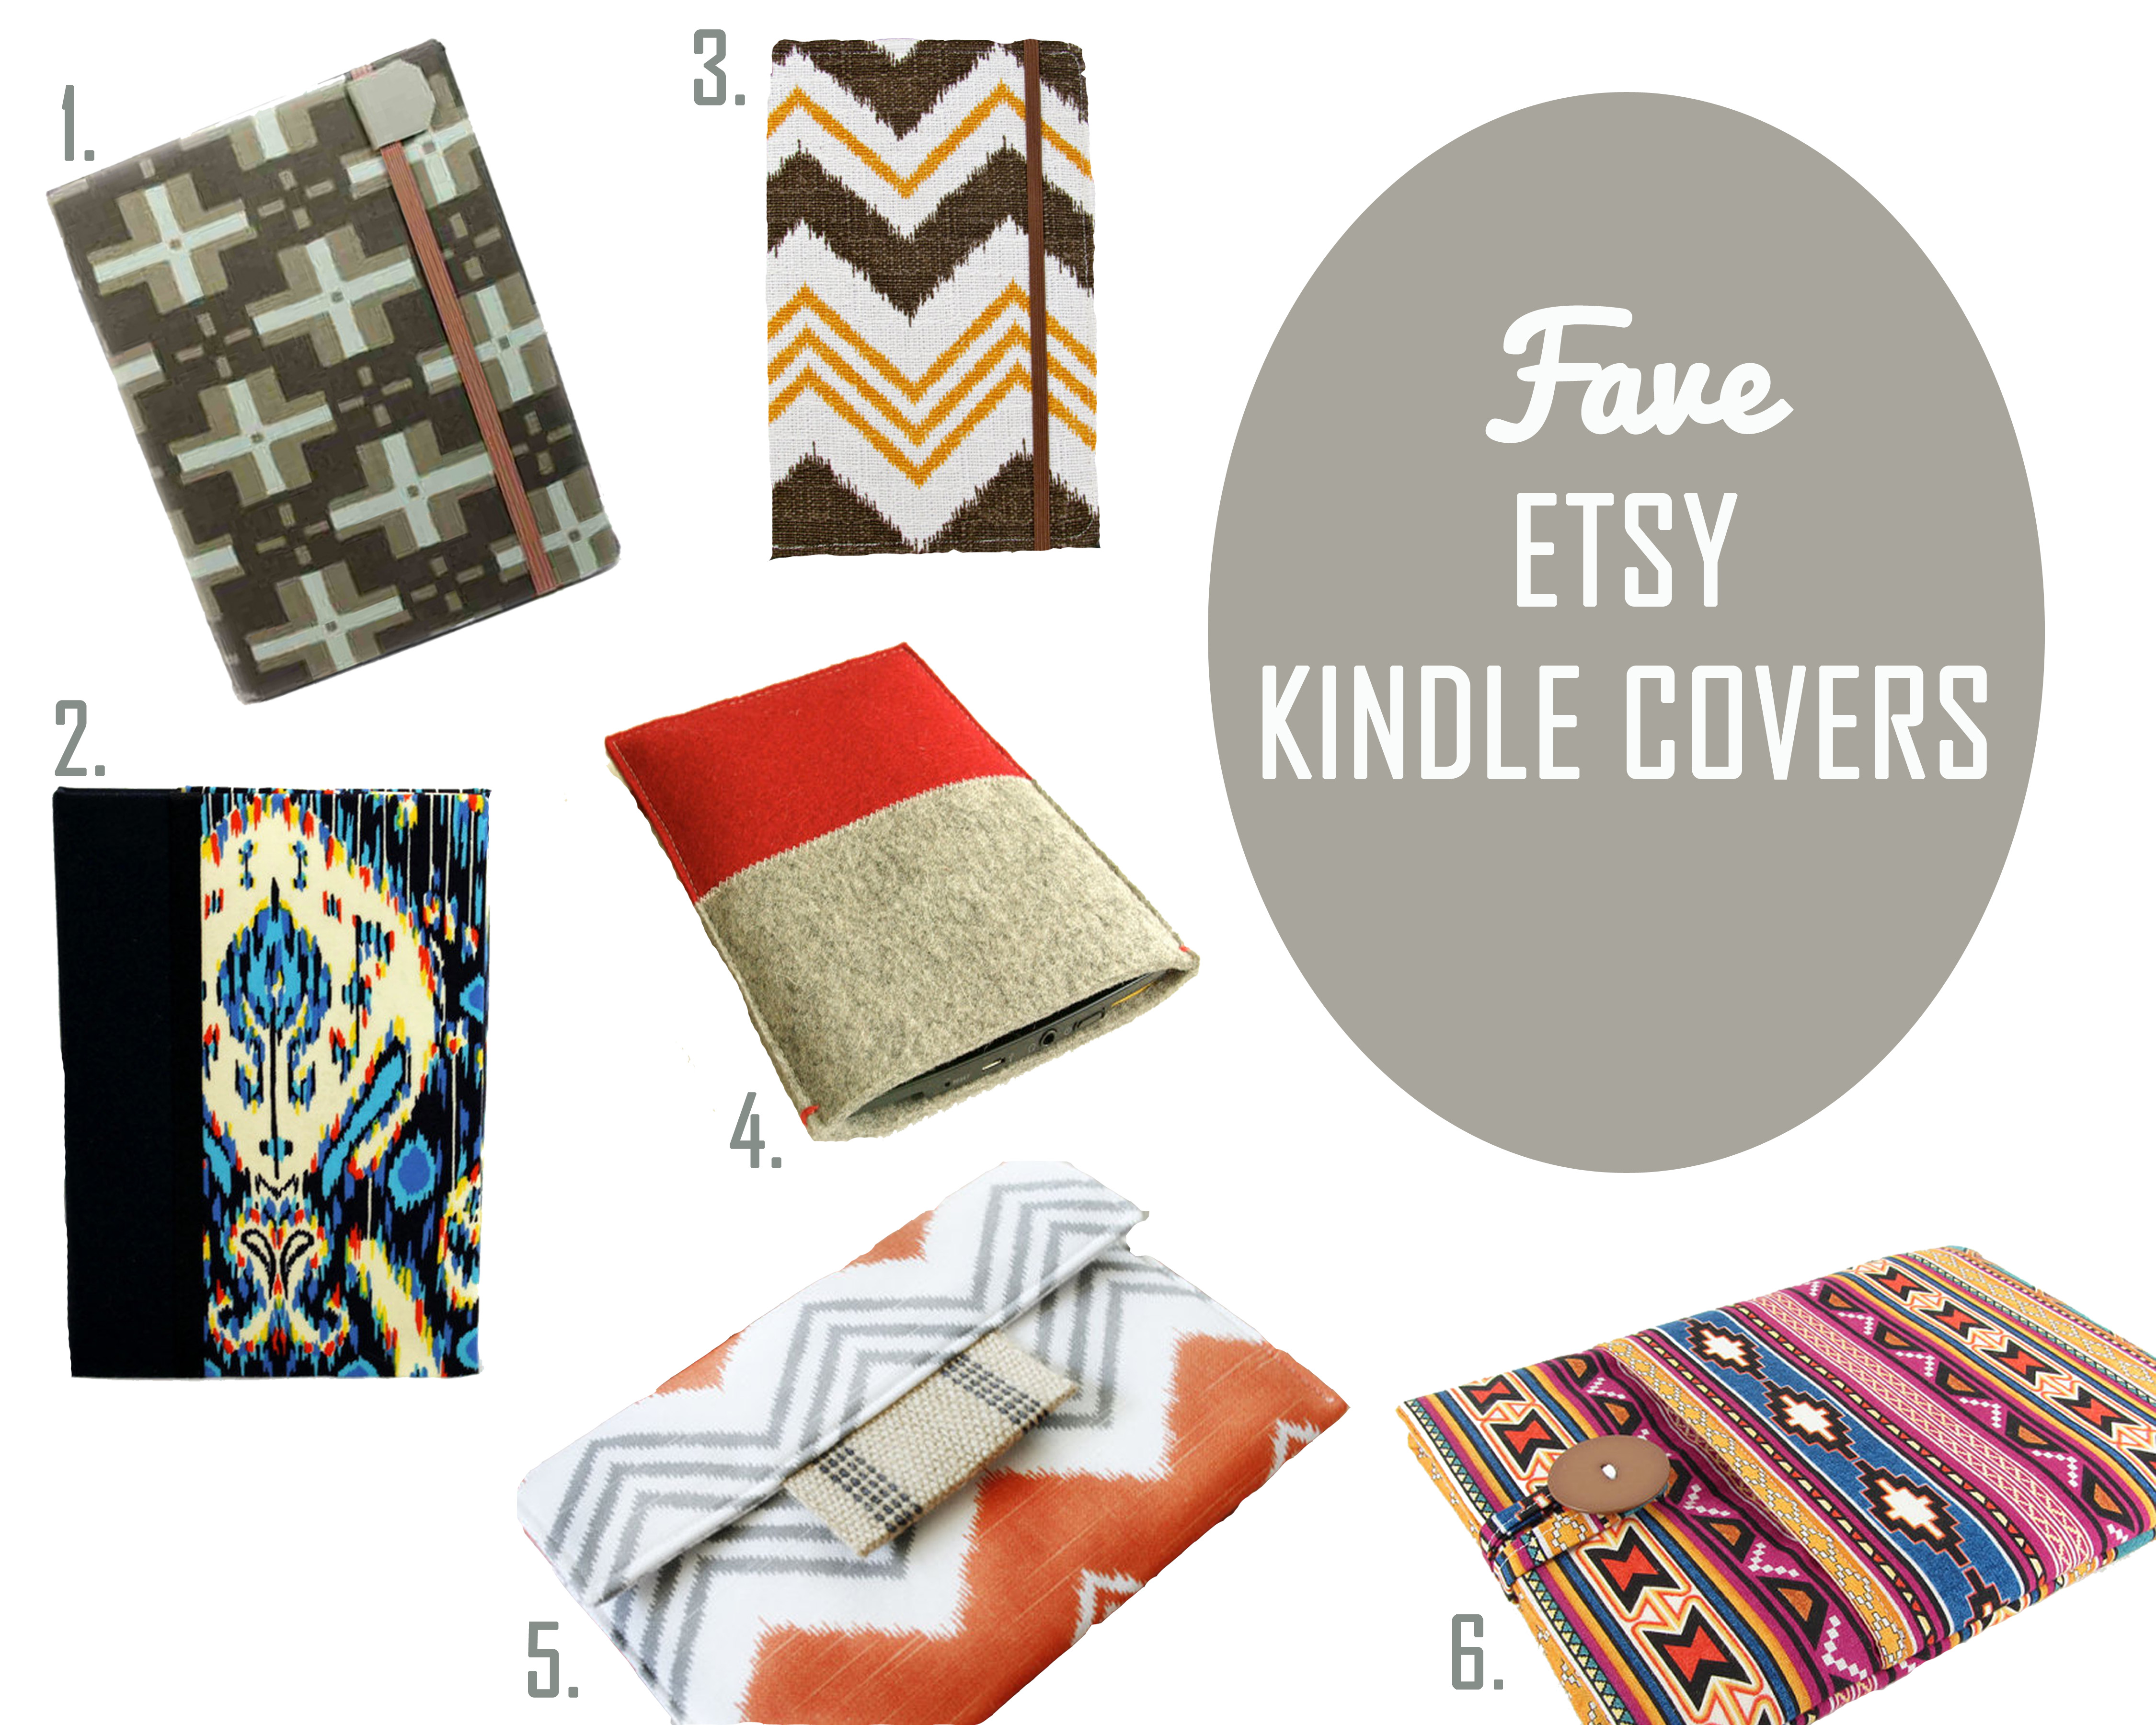 Etsy Kindle Covers copy